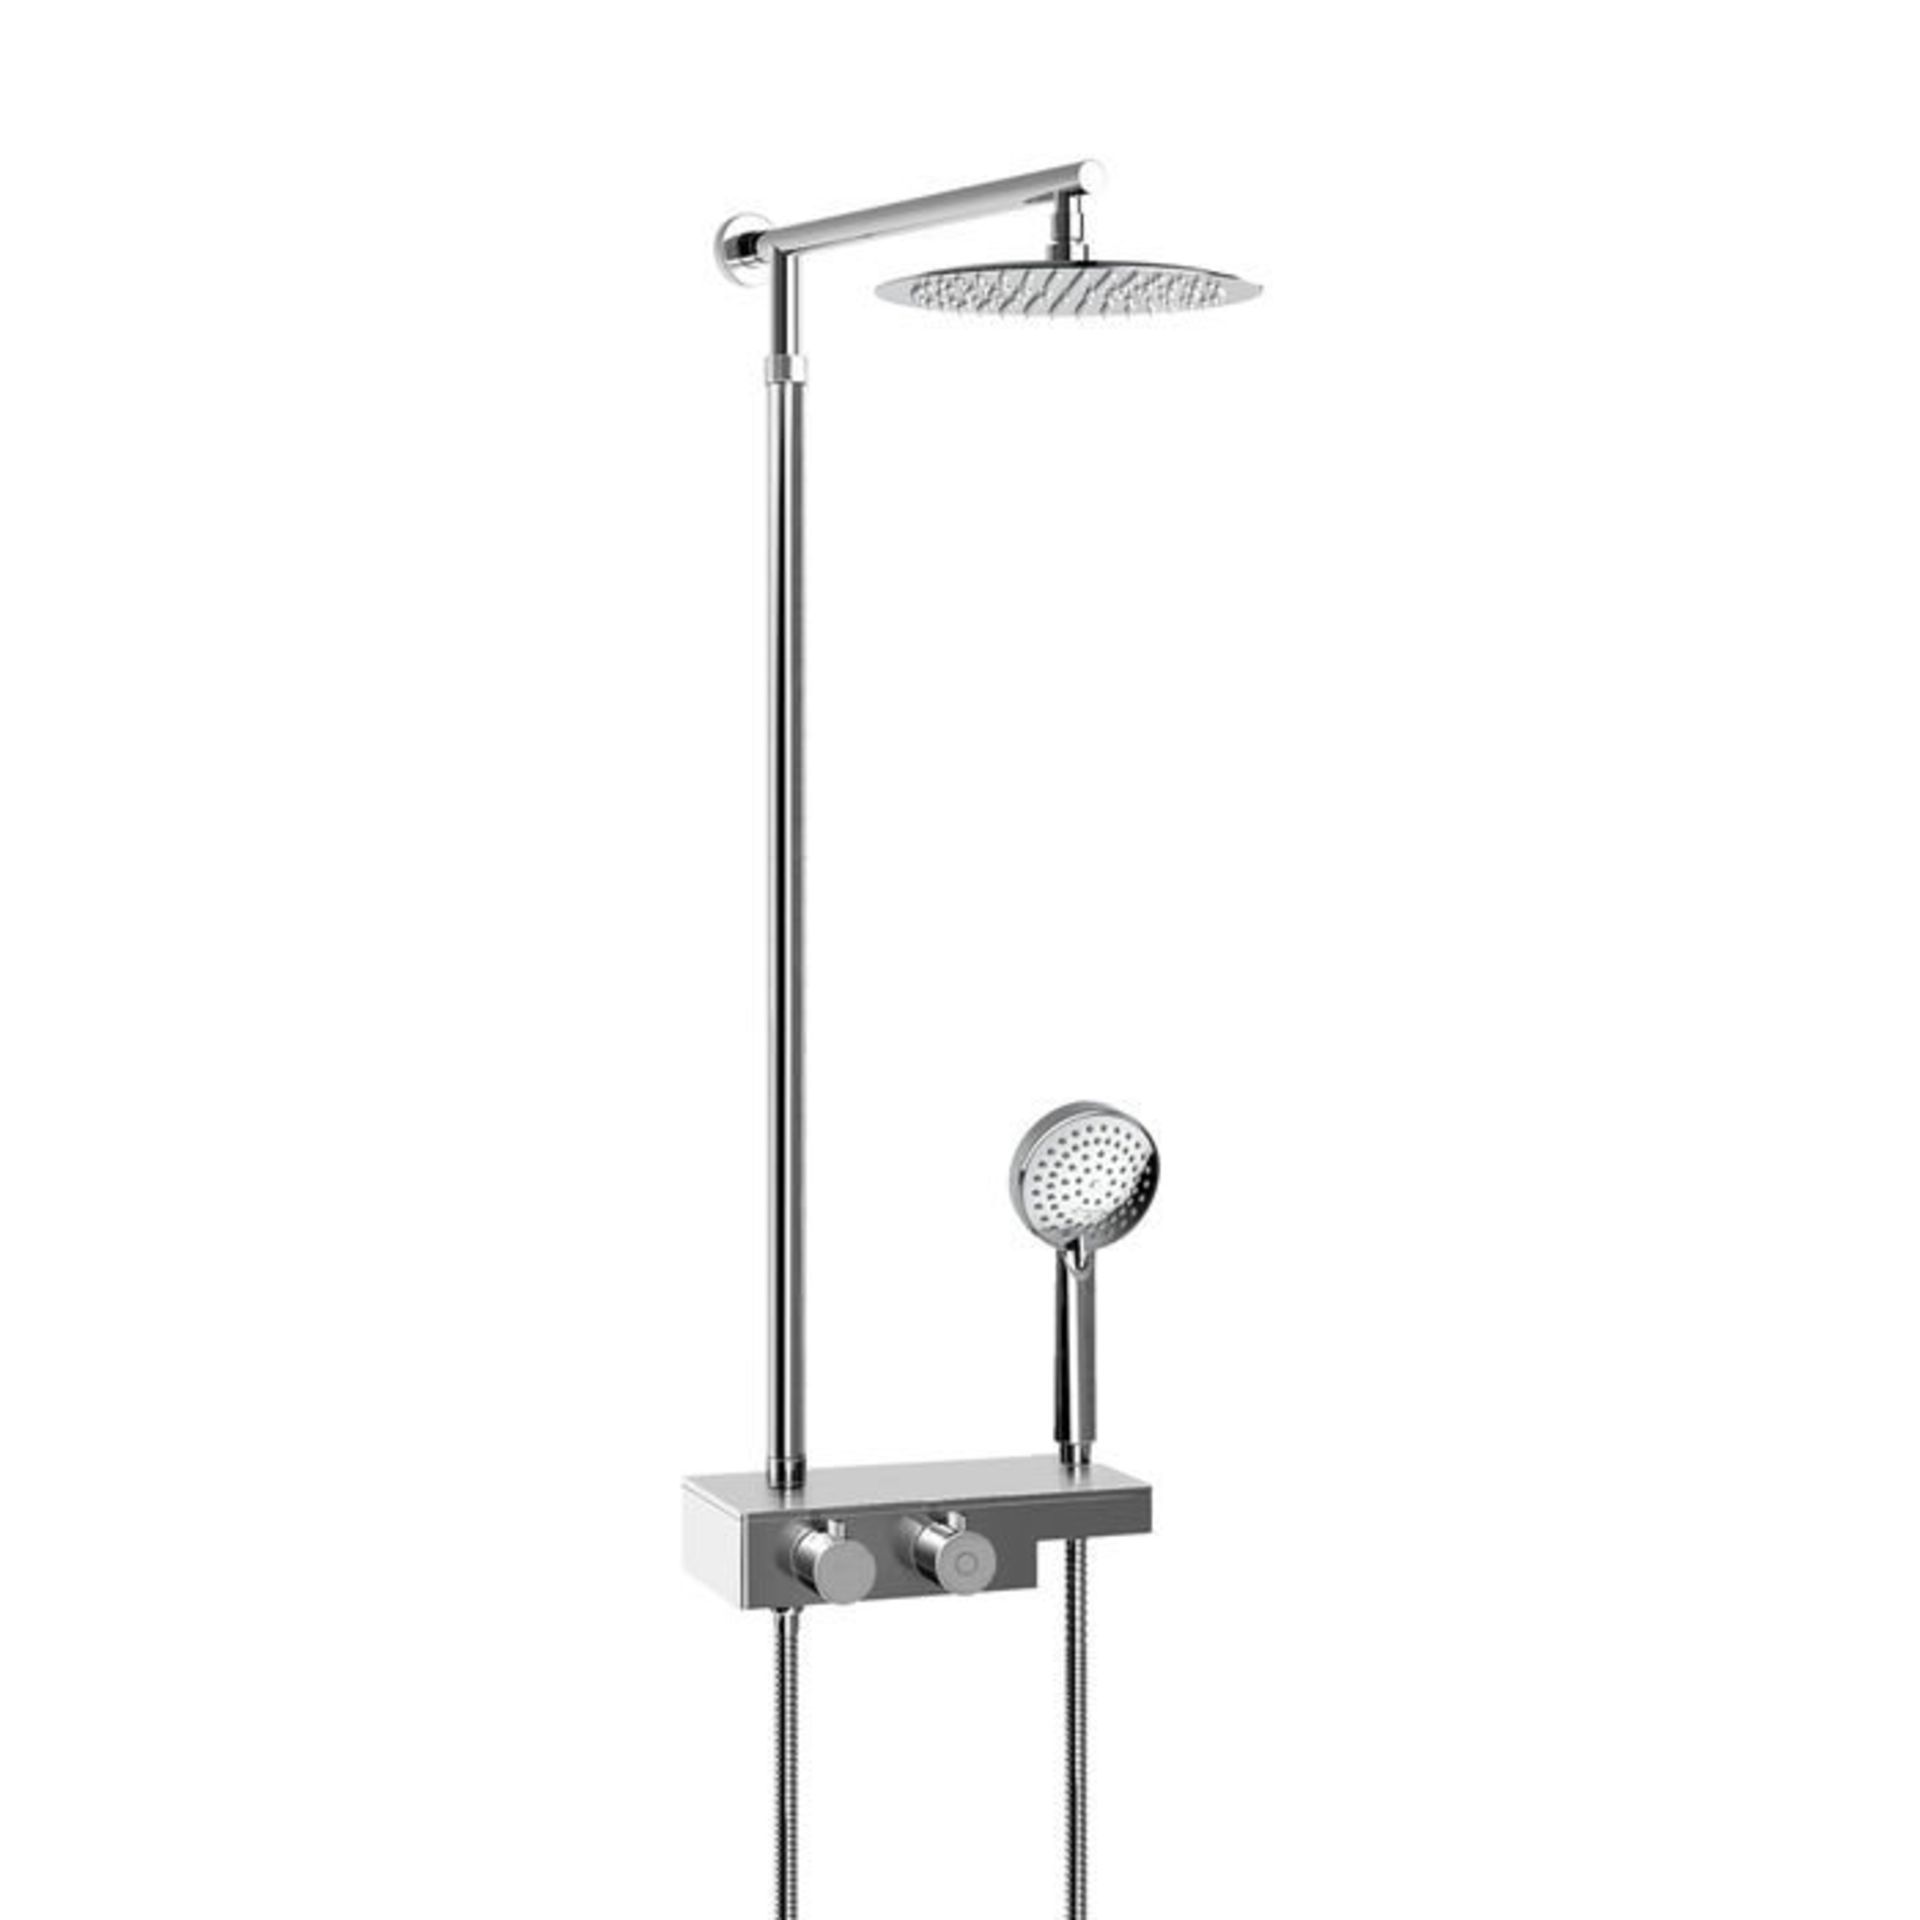 (H214) Round Exposed Thermostatic Mixer Shower Kit & Large Head. Cool to touch shower for additional - Image 6 of 6